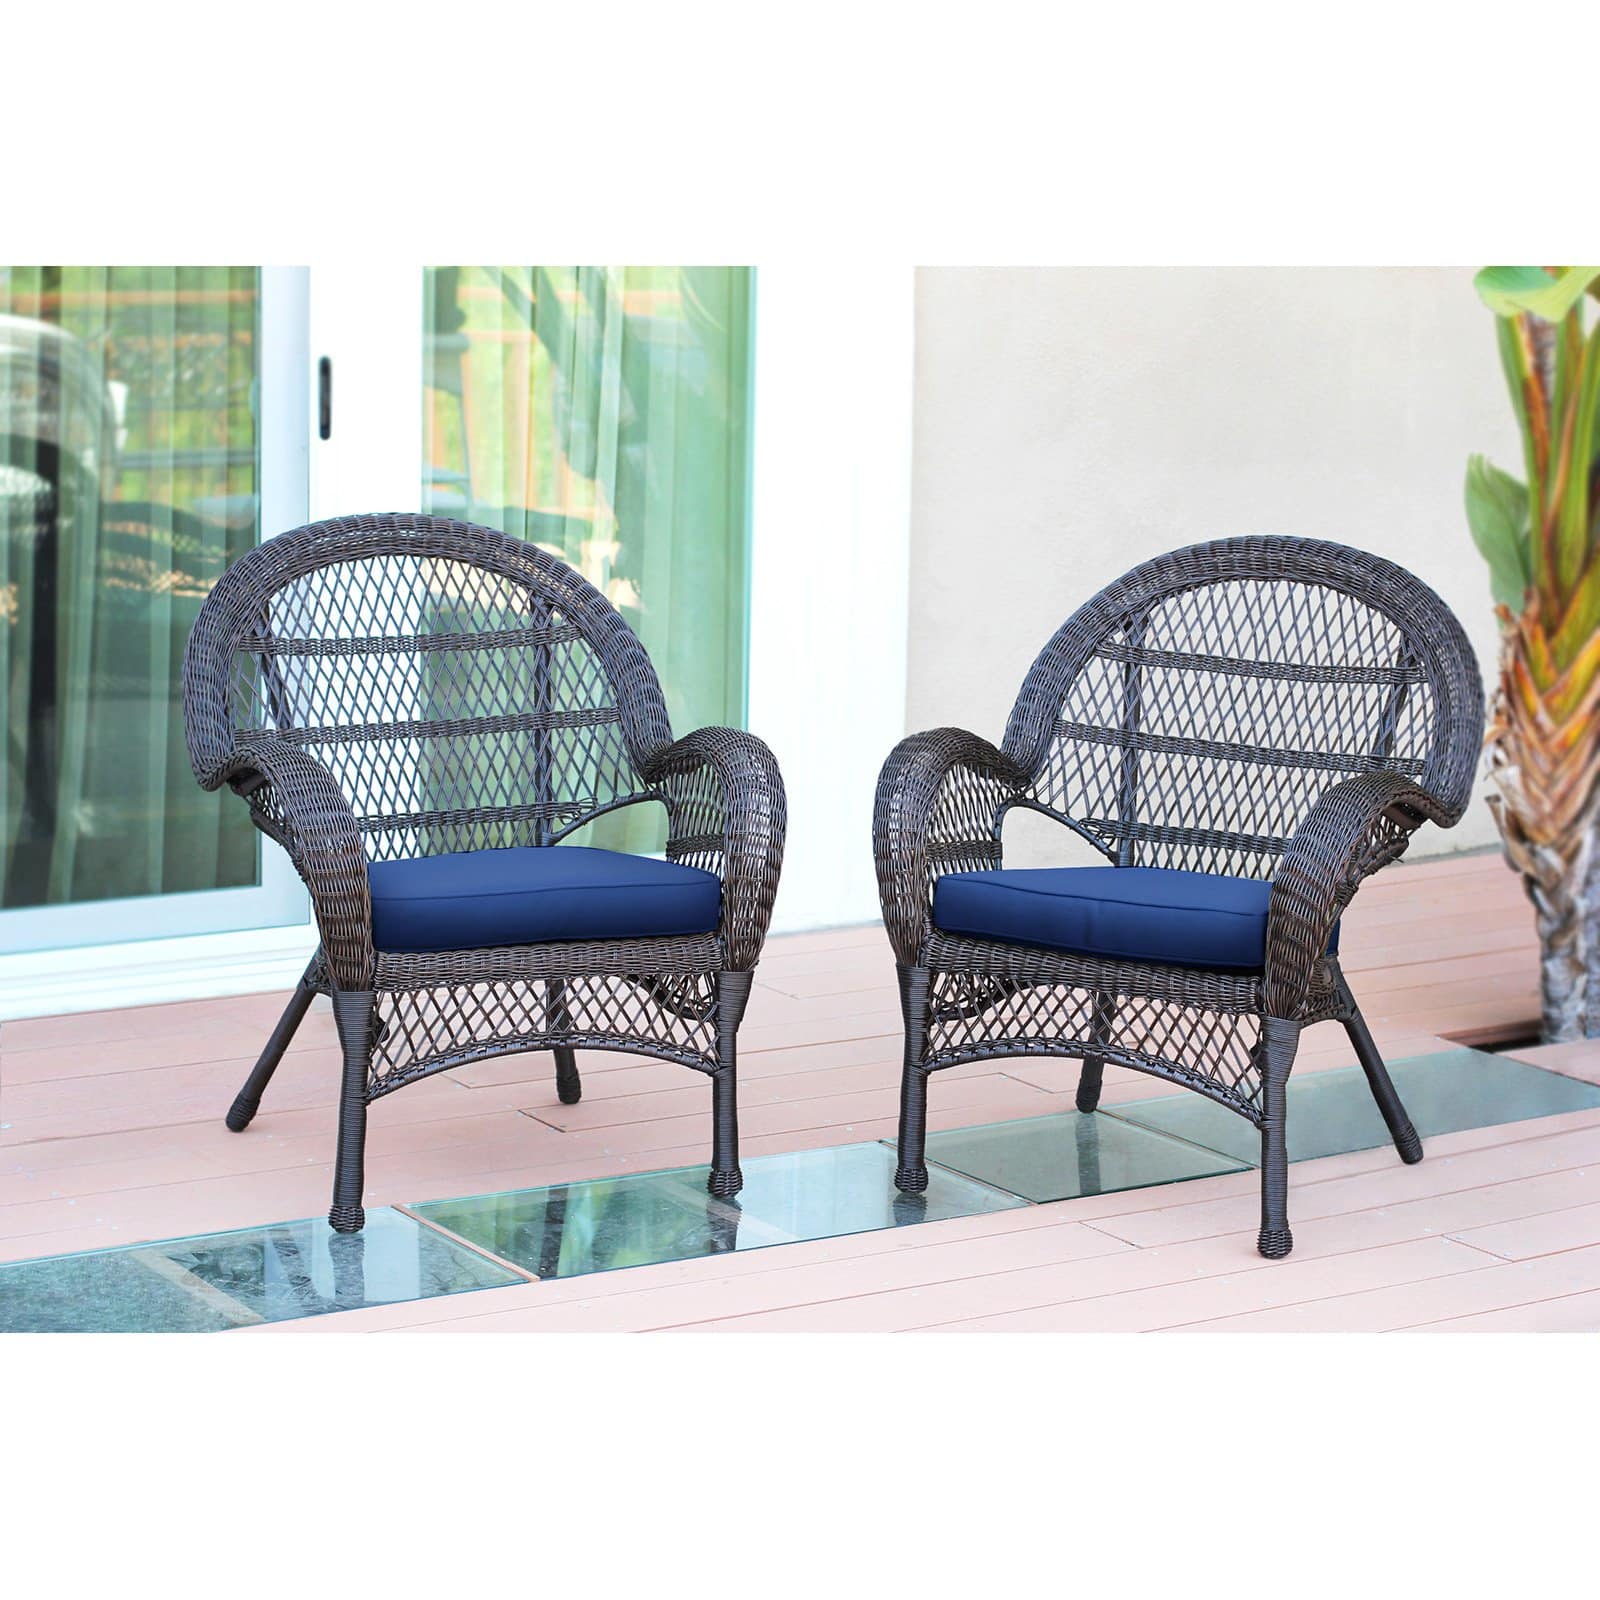 Jeco Santa Maria Wicker Patio Chairs with Optional Cushion - Set of 2 - image 3 of 11